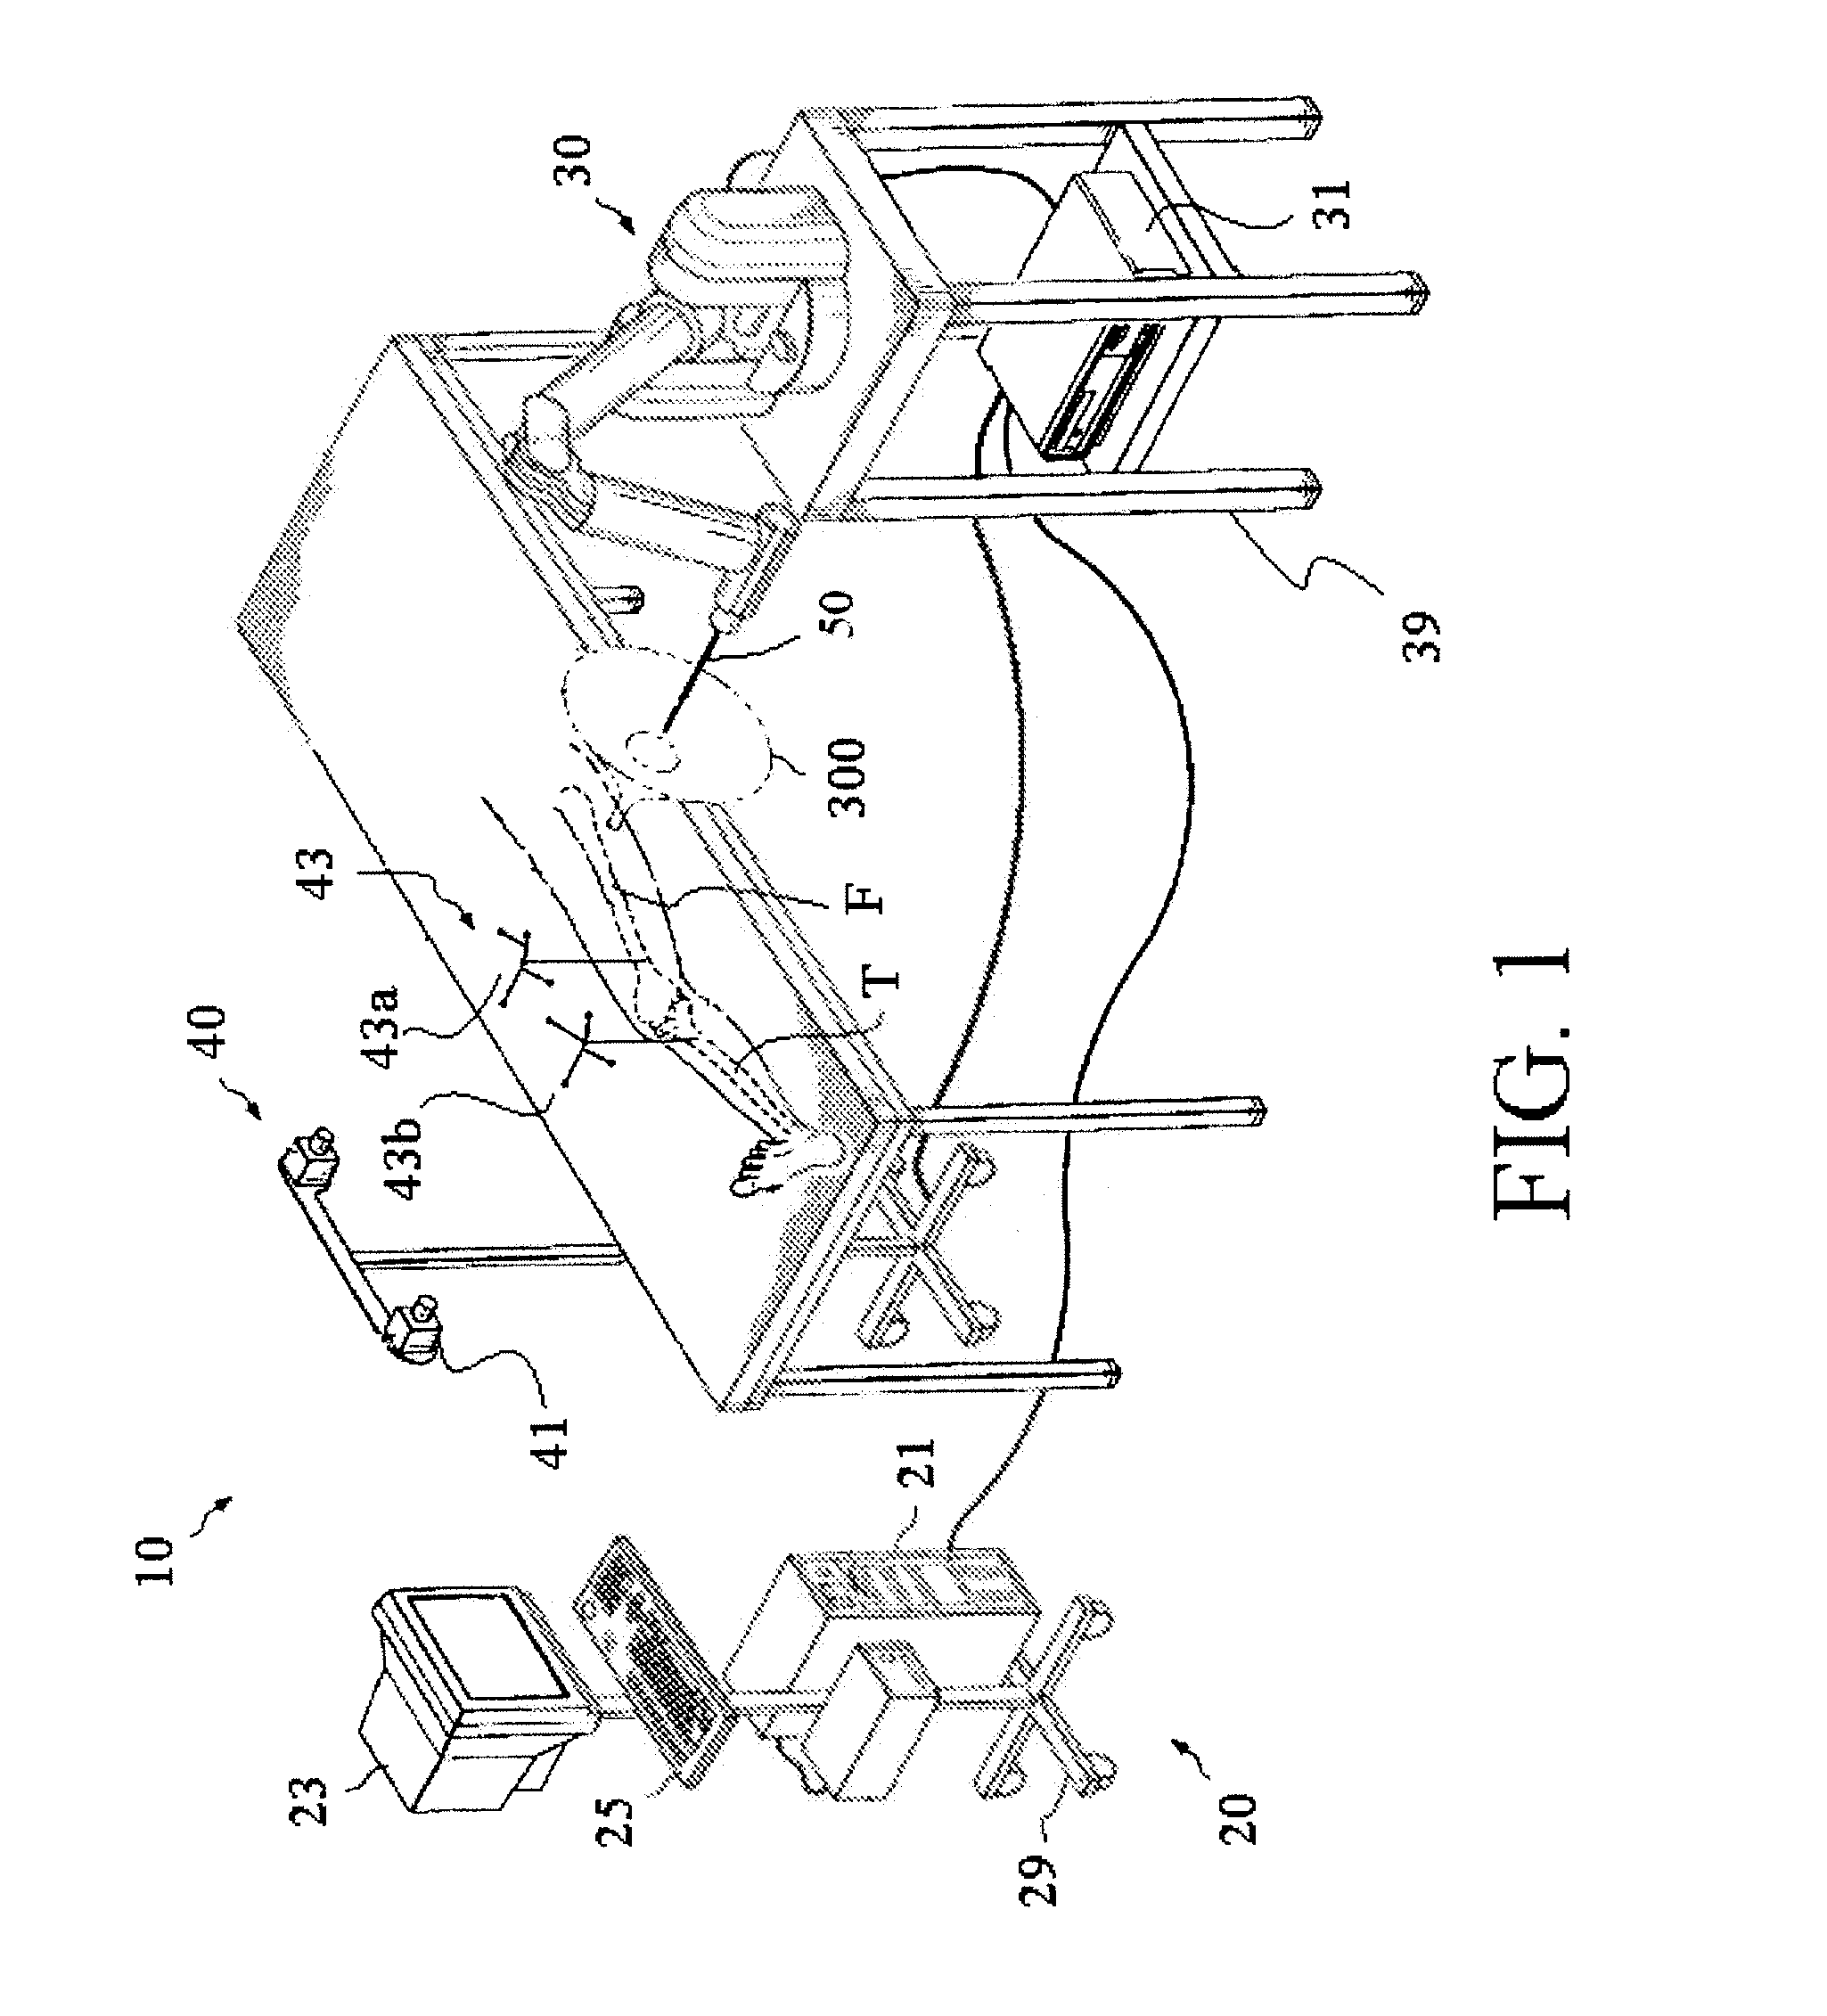 Method and apparatus for controlling a haptic device